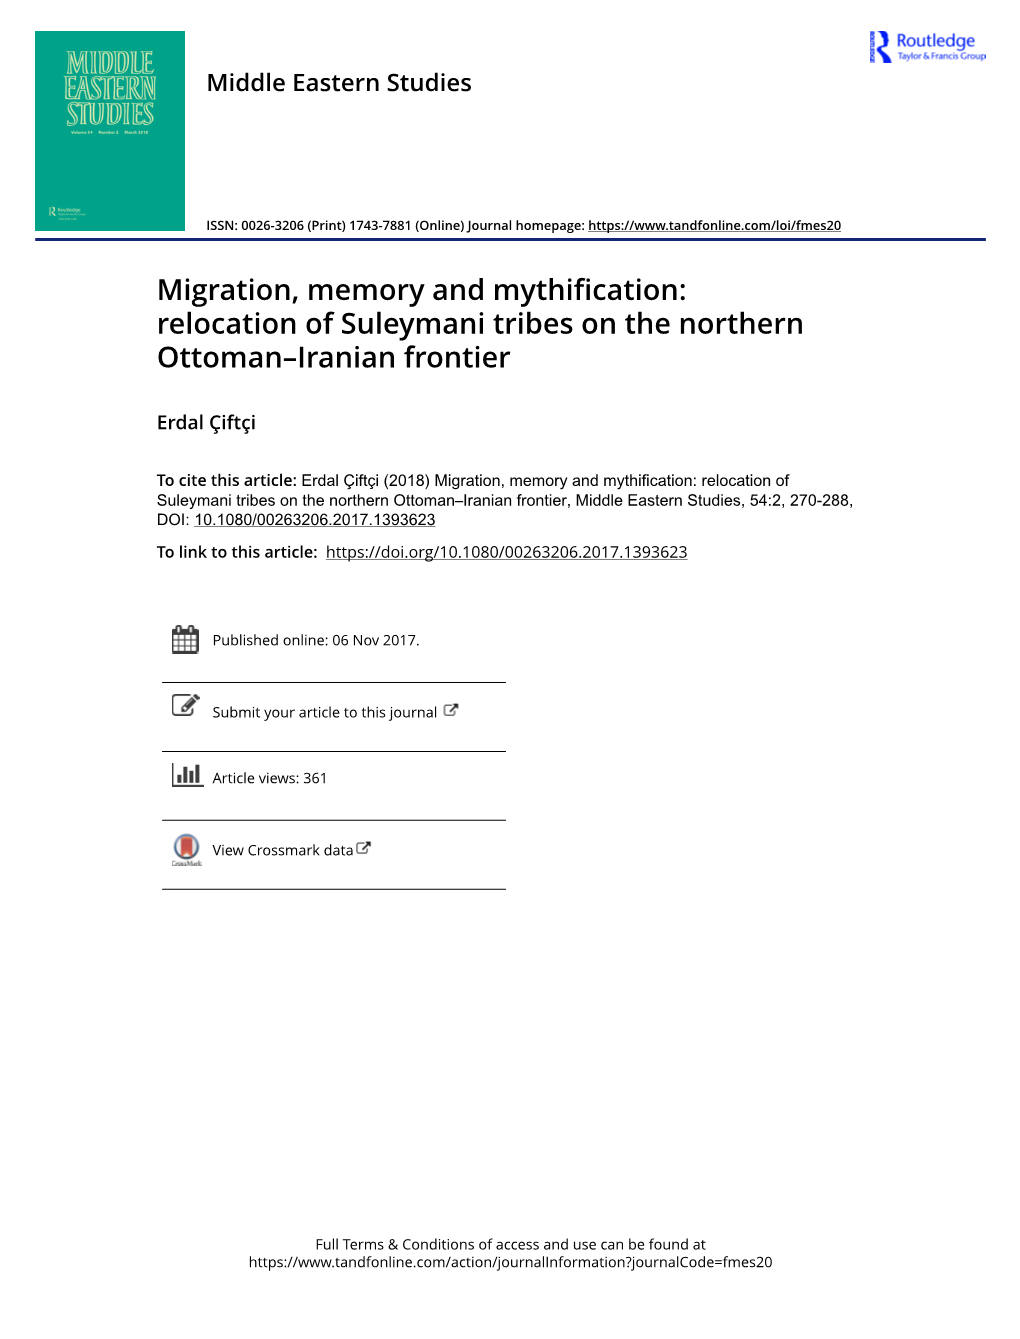 Migration, Memory and Mythification: Relocation of Suleymani Tribes on the Northern Ottoman–Iranian Frontier